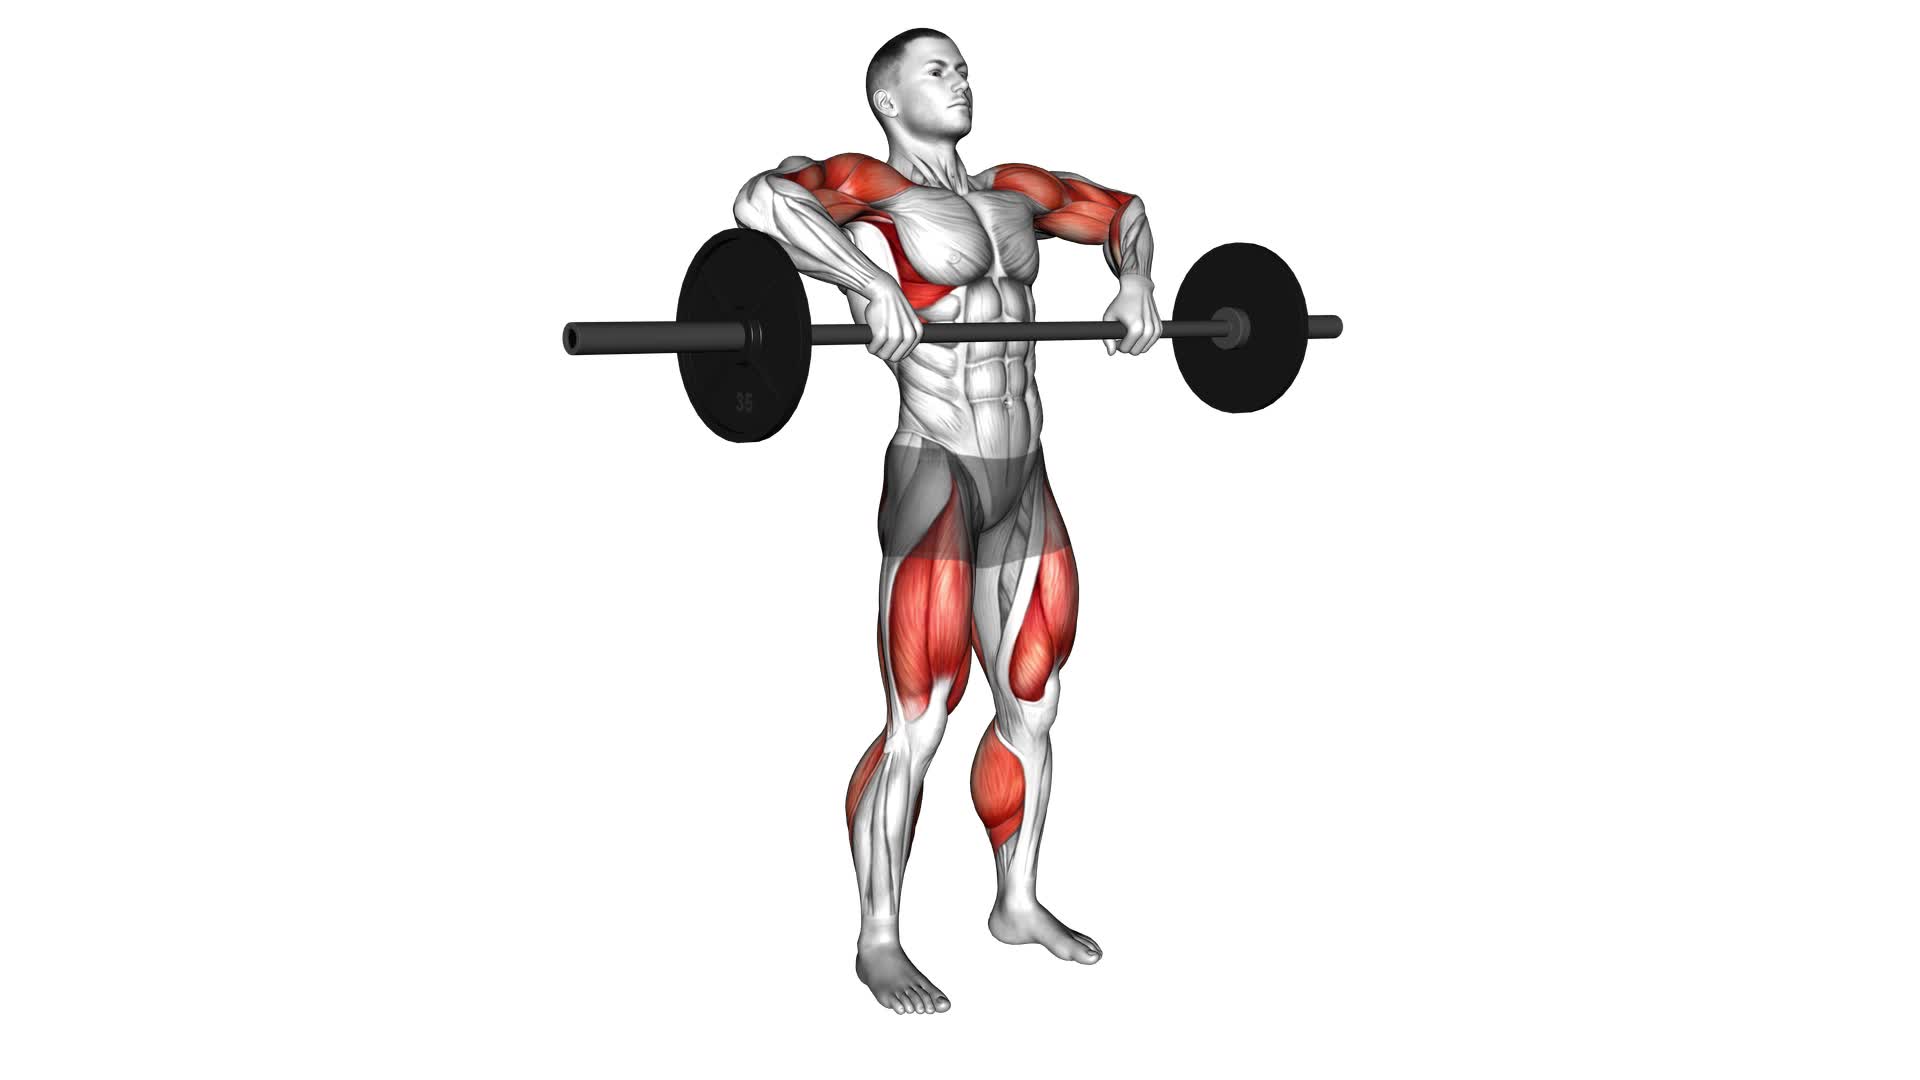 Barbell Clean Pull - Video Exercise Guide & Tips